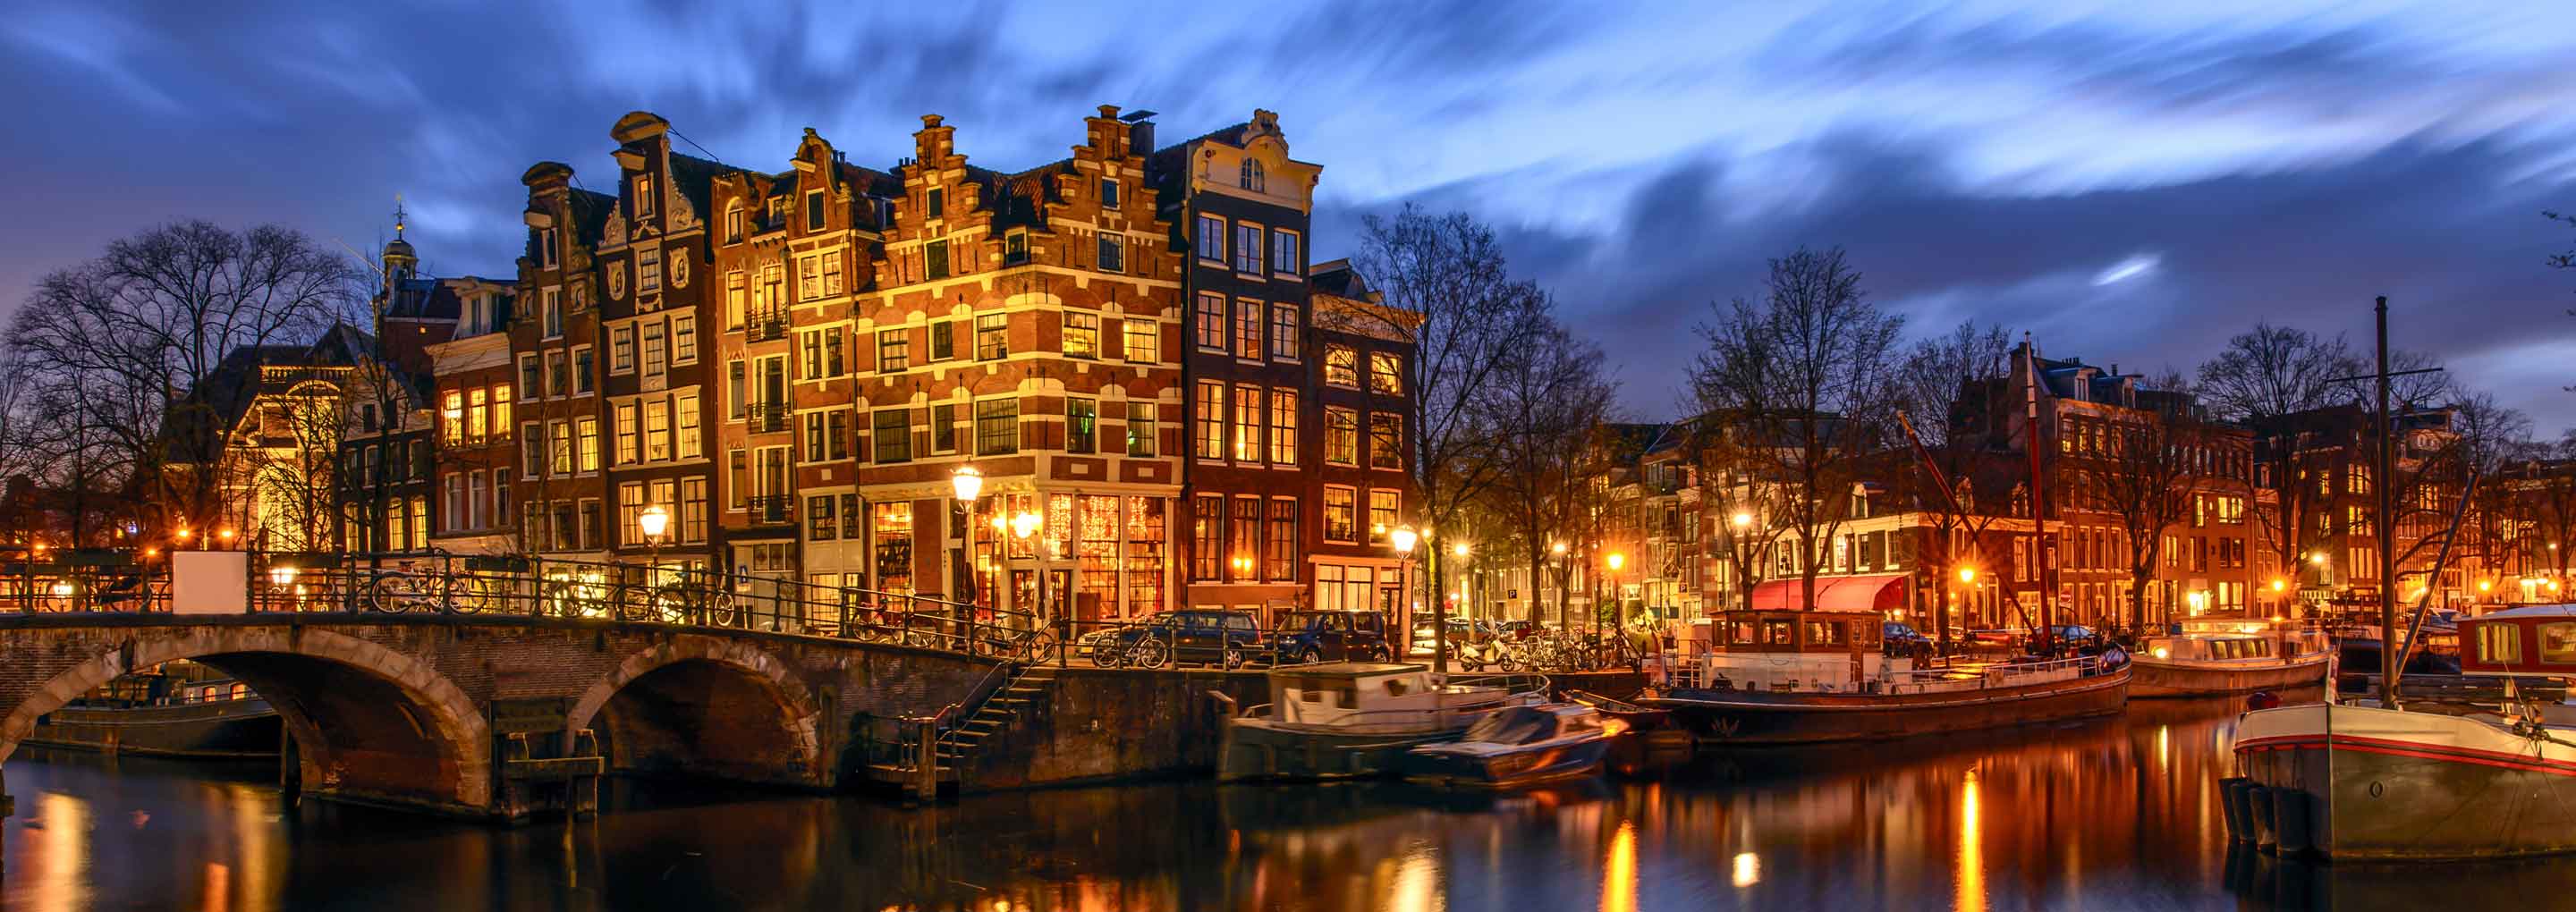 Beautiful evening view on the canals in Amsterdam.